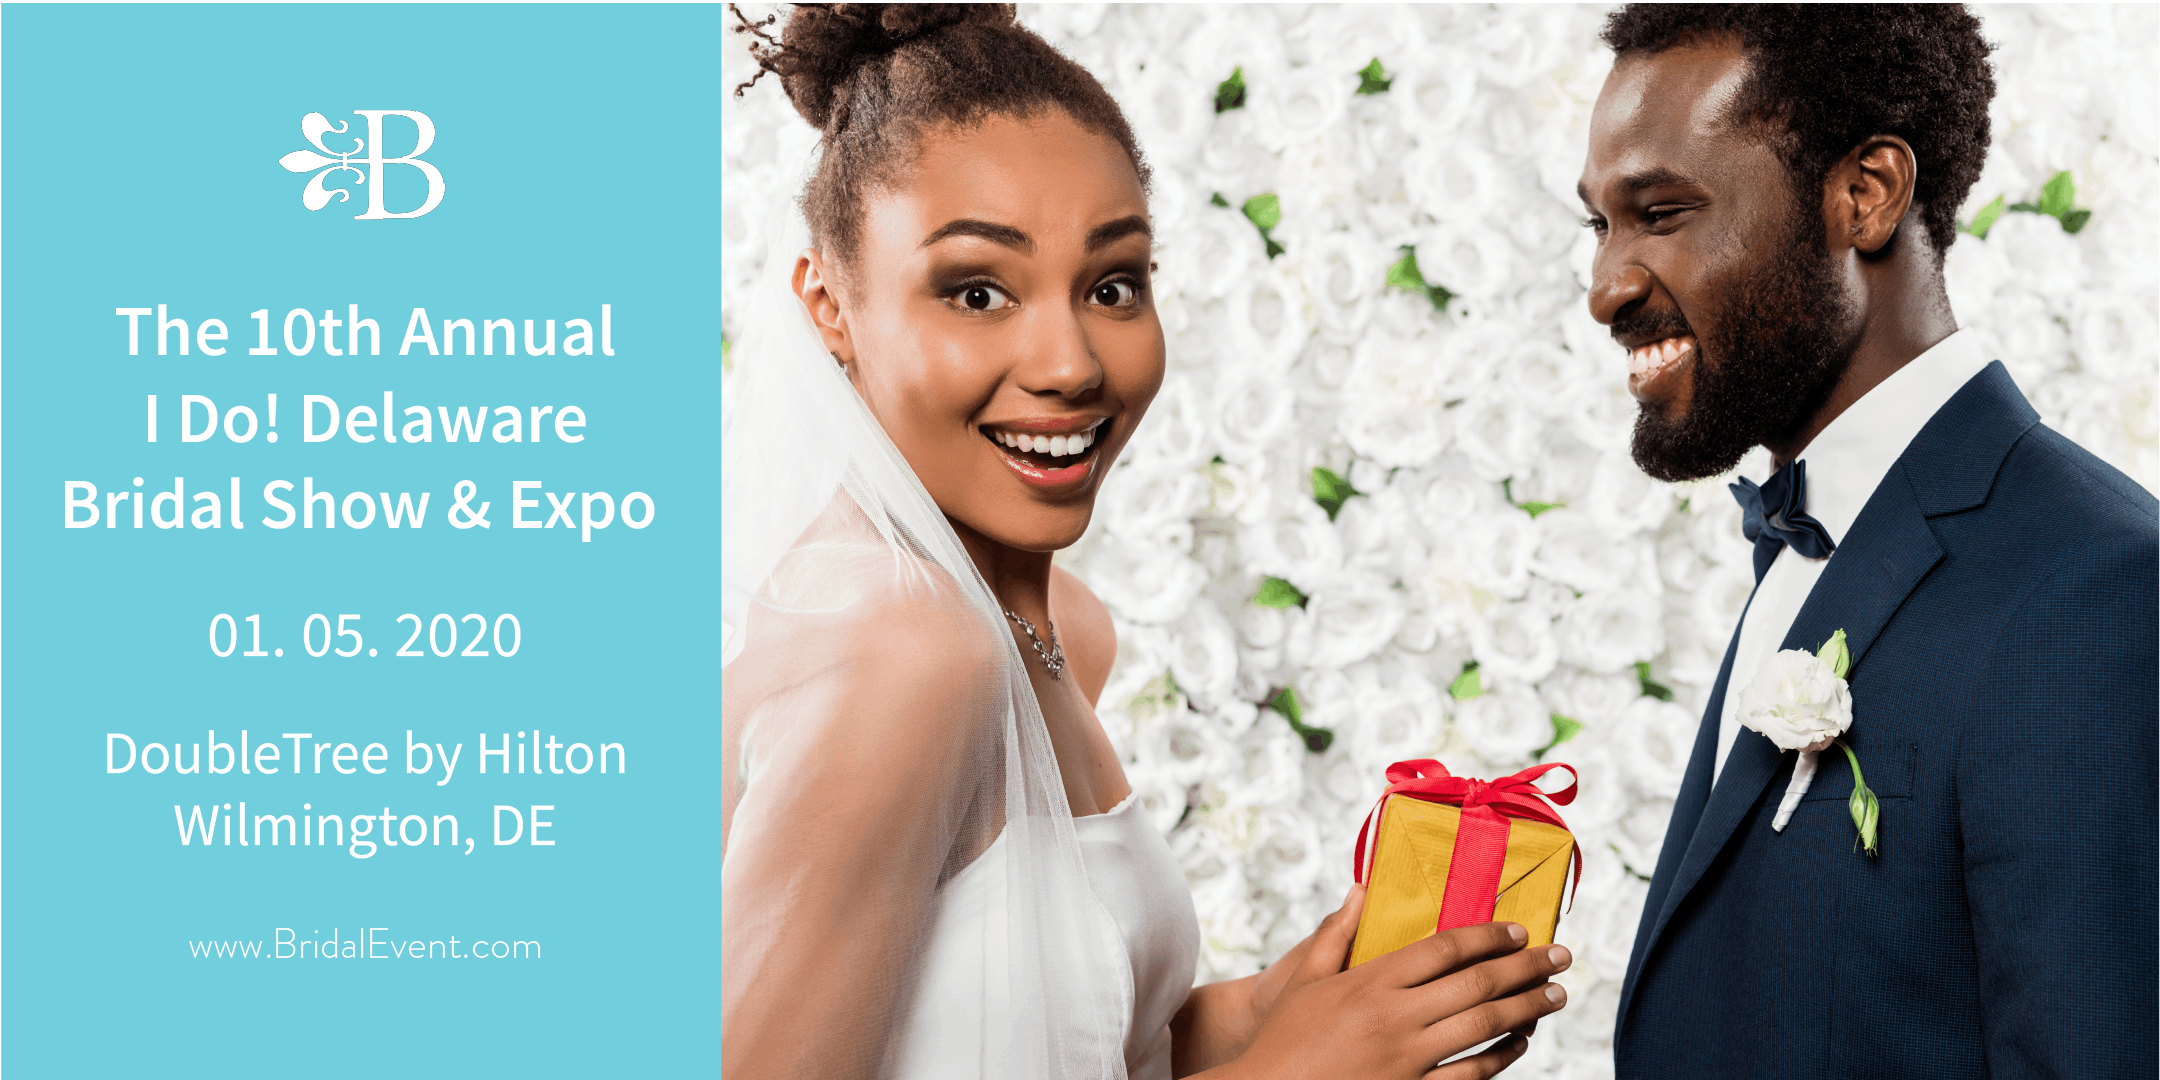 The 10th Annual I Do! Delaware Bridal Show and Expo